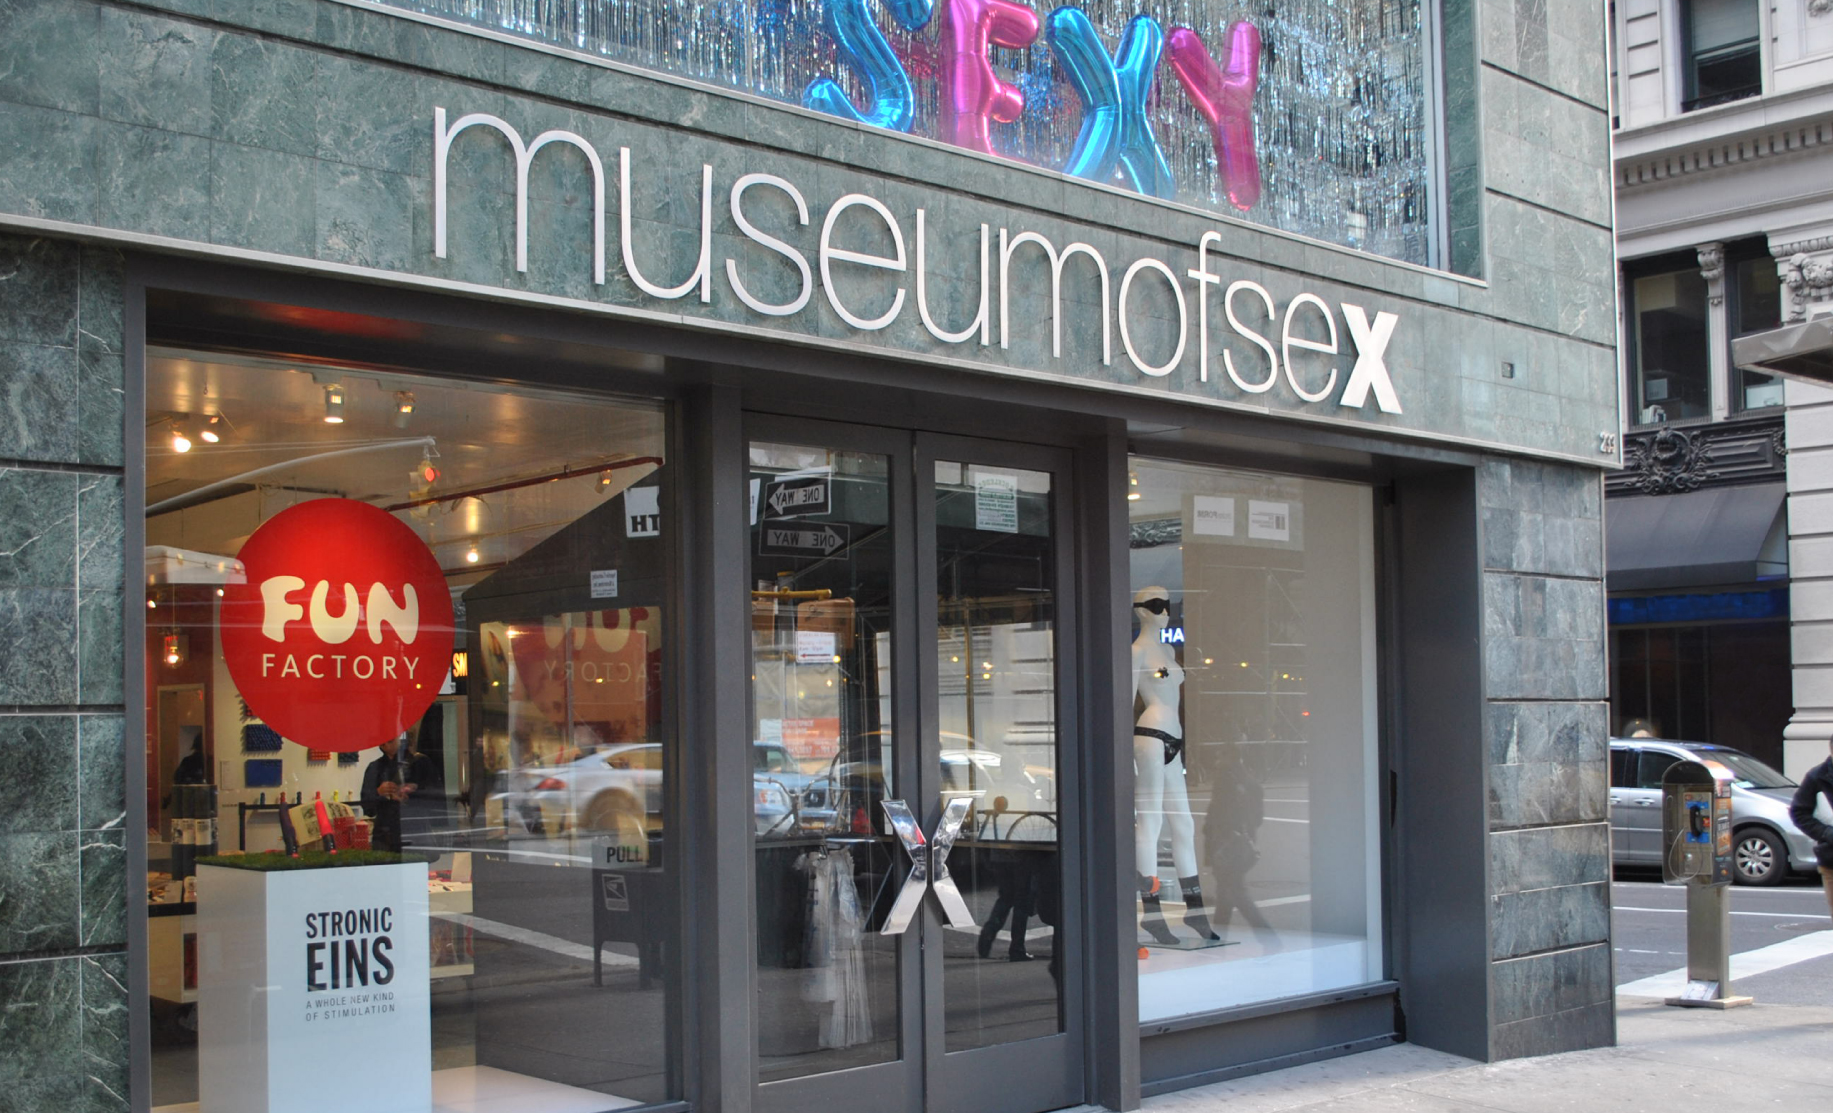 Museum of Sex in NYC Launches FUN FACTORY’s new Stronic